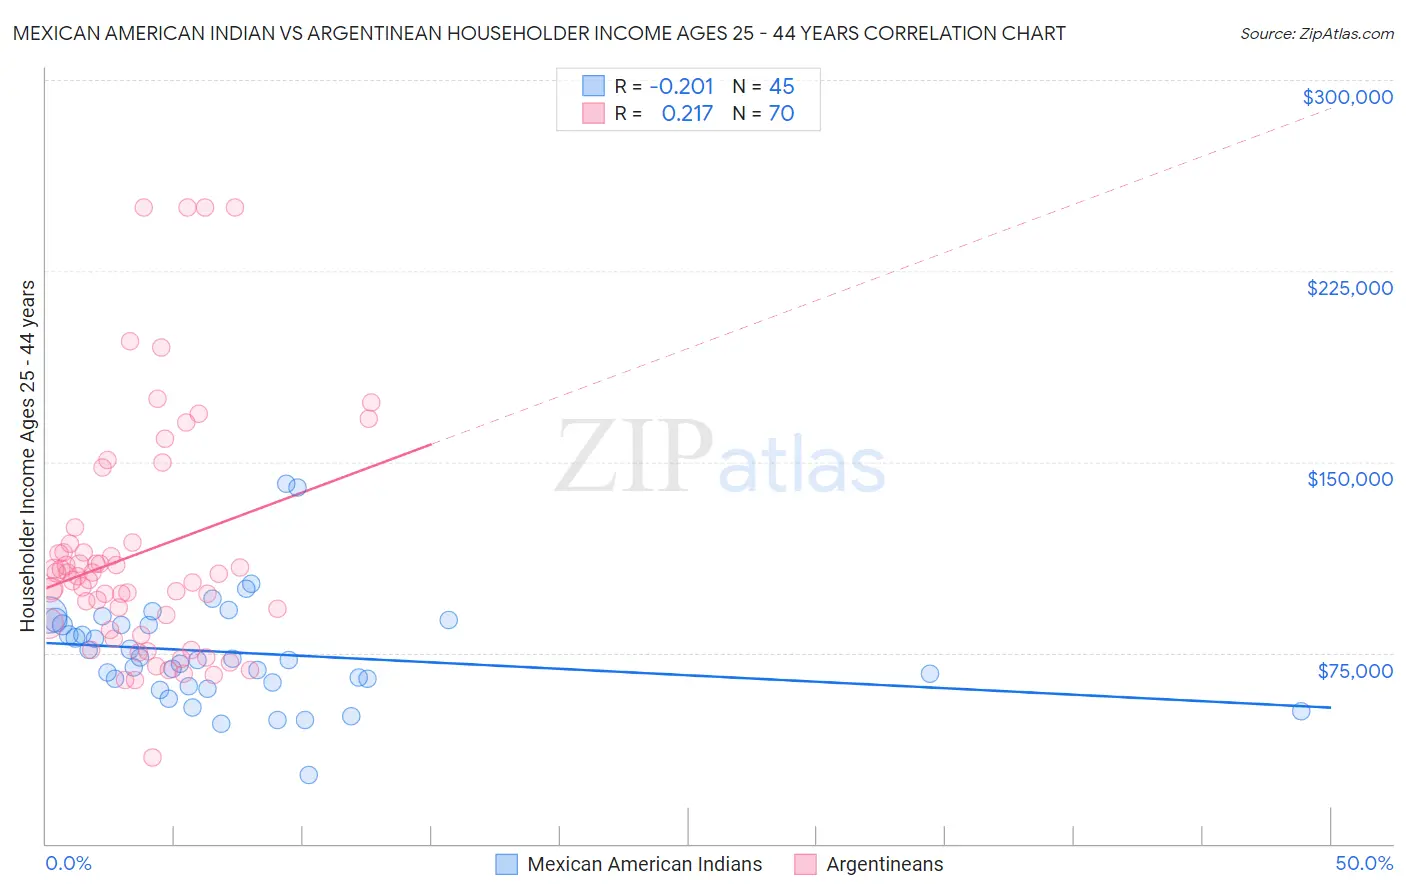 Mexican American Indian vs Argentinean Householder Income Ages 25 - 44 years